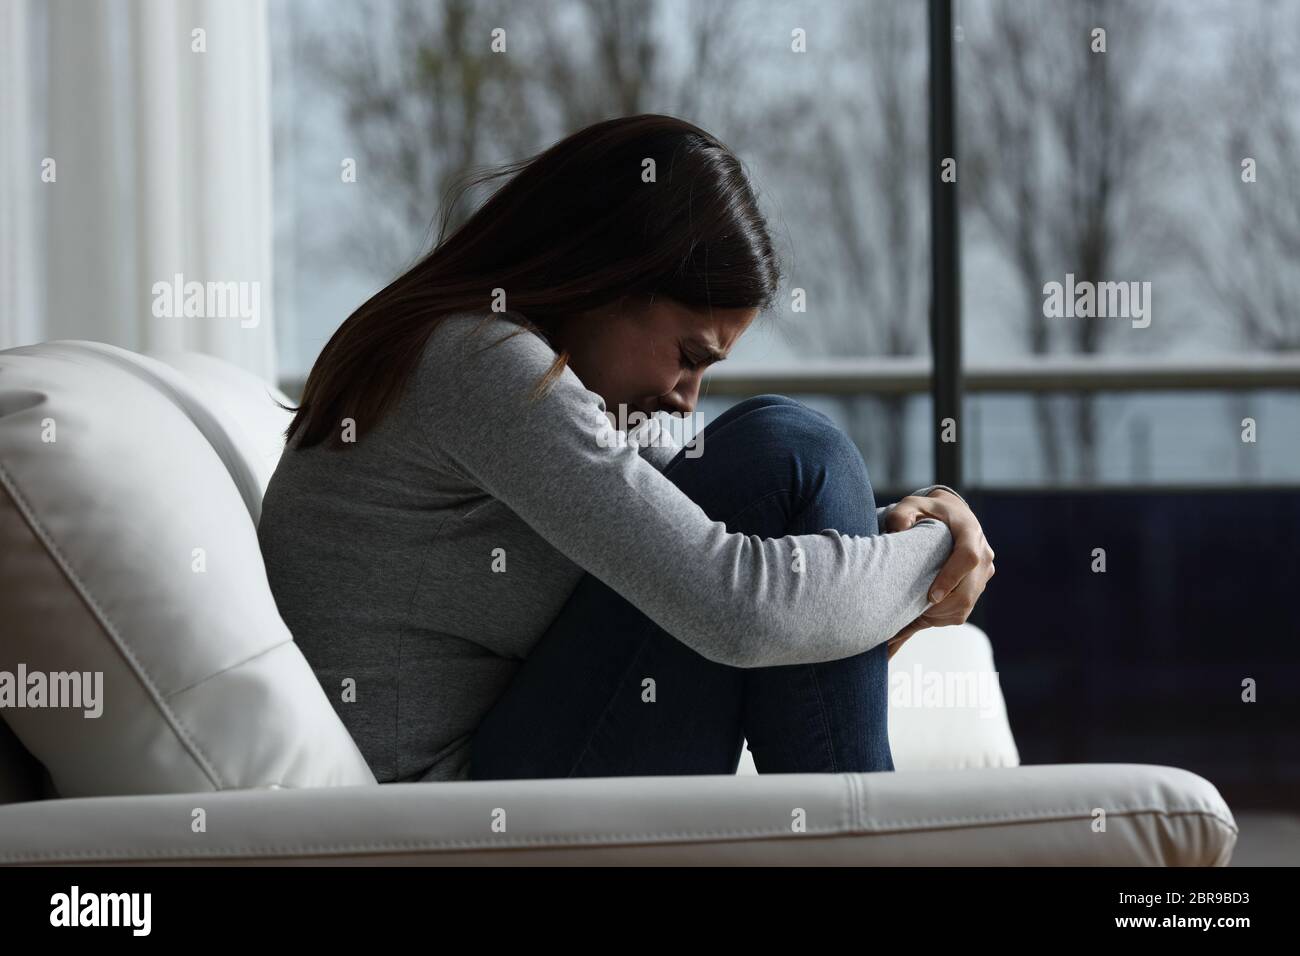 sad woman crying, looking aside on black background, closeup portrait,  profile view Stock Photo - Alamy